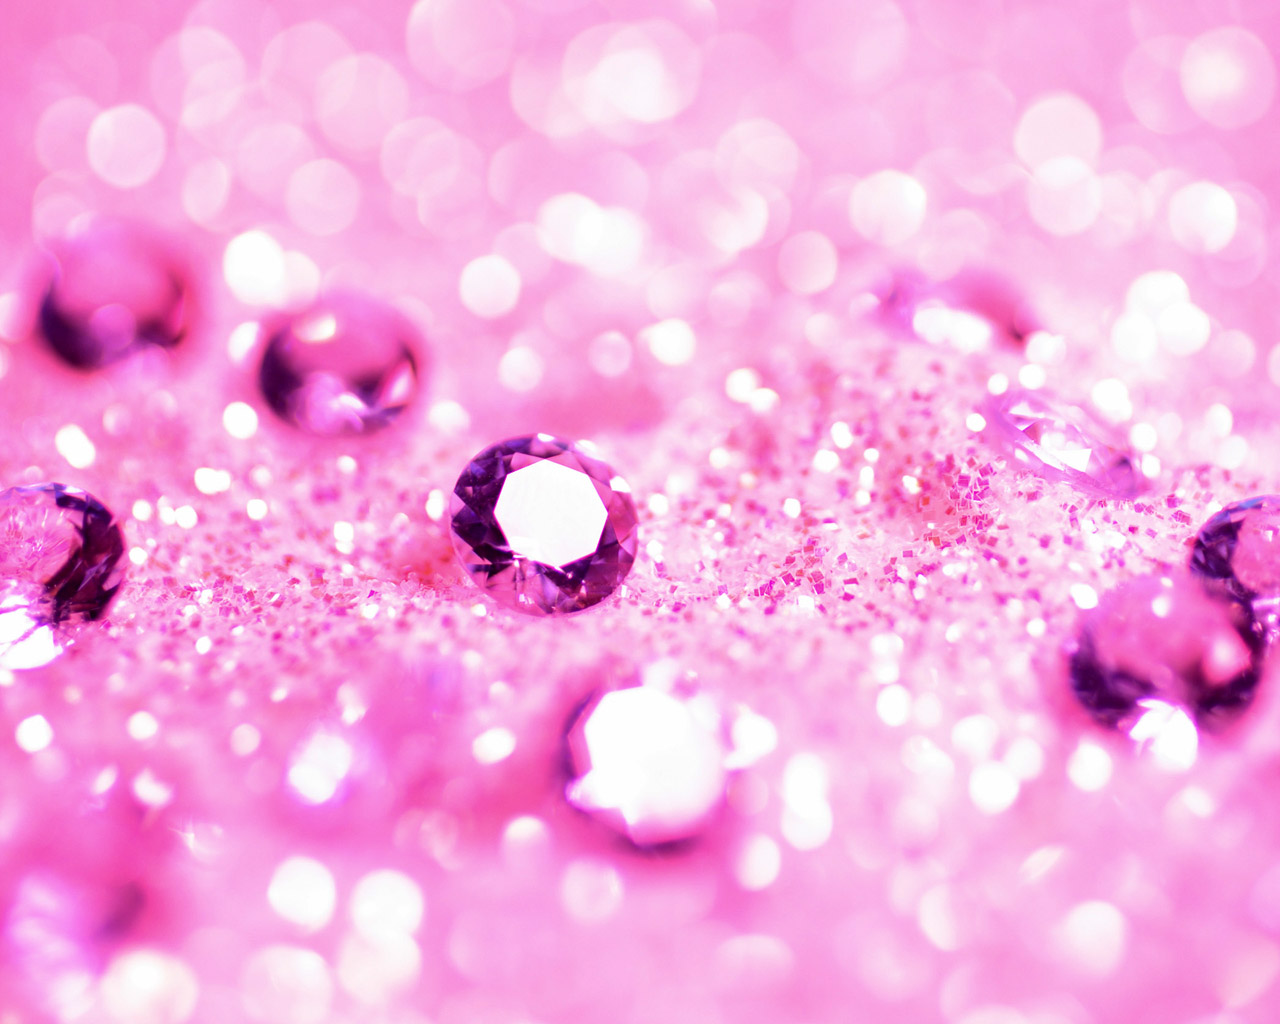 40 Cool Pink Wallpapers for Your Desktop 1280x1024